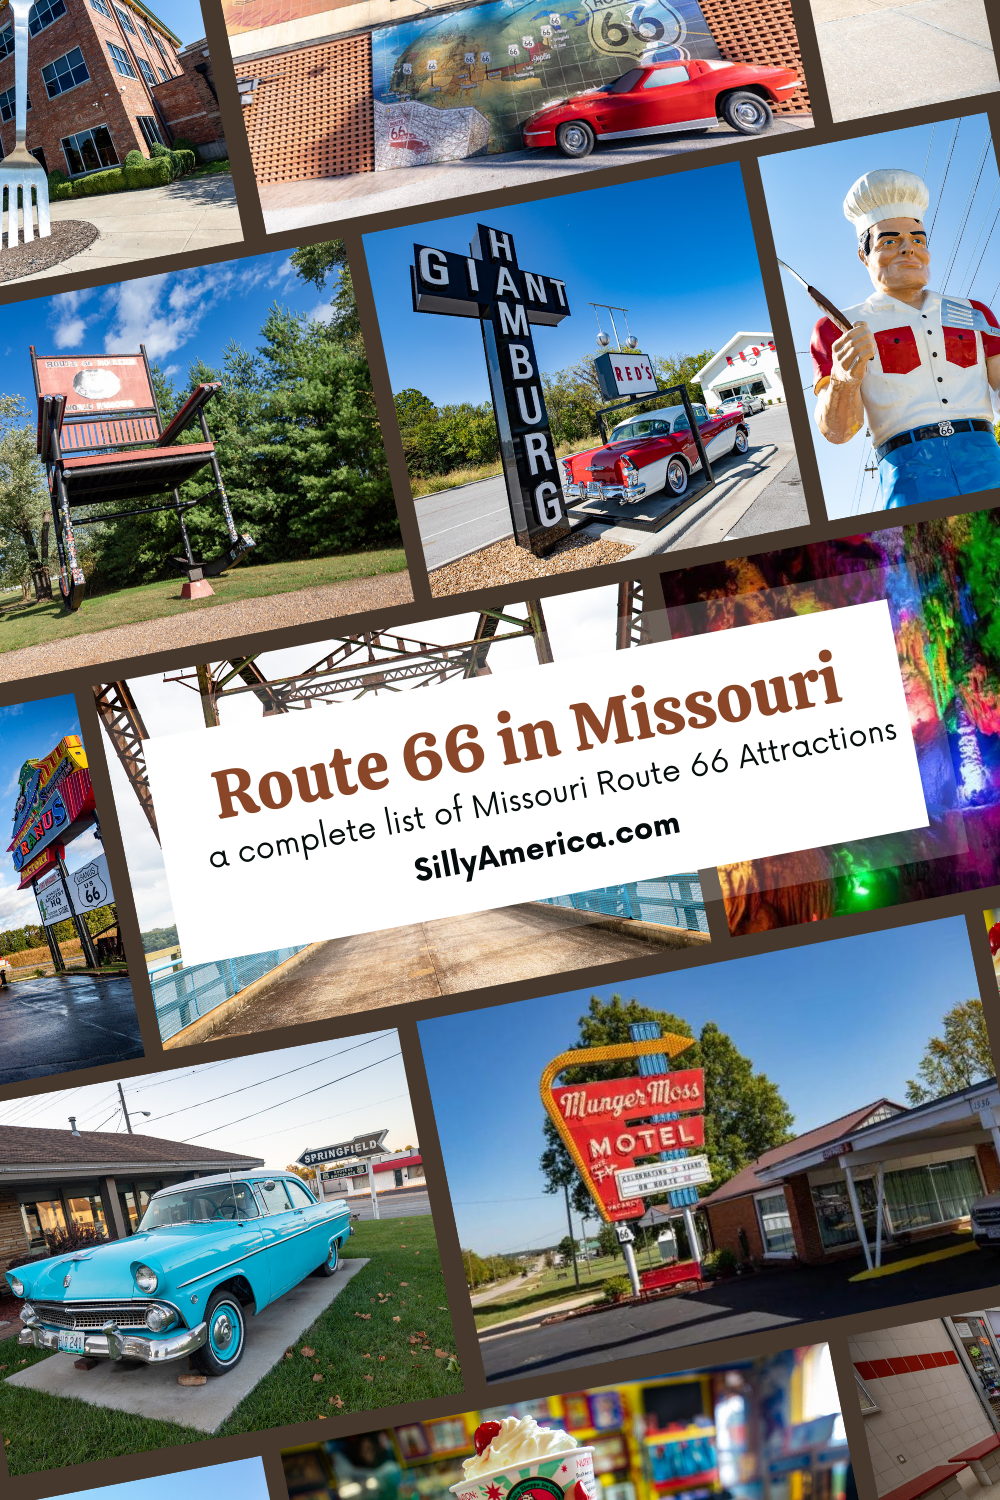 If you’re looking for classic roadside attractions, iconic diners, informative museums, and nostalgic nod to the past, a road trip on Route 66 in Missouri offers everything you’re looking for. Pull over at any and all of the stops on this complete list of Missouri Route 66 Attractions and start planning your road trip on the Mother Road today. #Route66 #Missouri #Route66RoadTrip #MissouriRoute66 #MissouriRoute66RoadTrip #MissouriRoadTrip #travel #RoadTrip